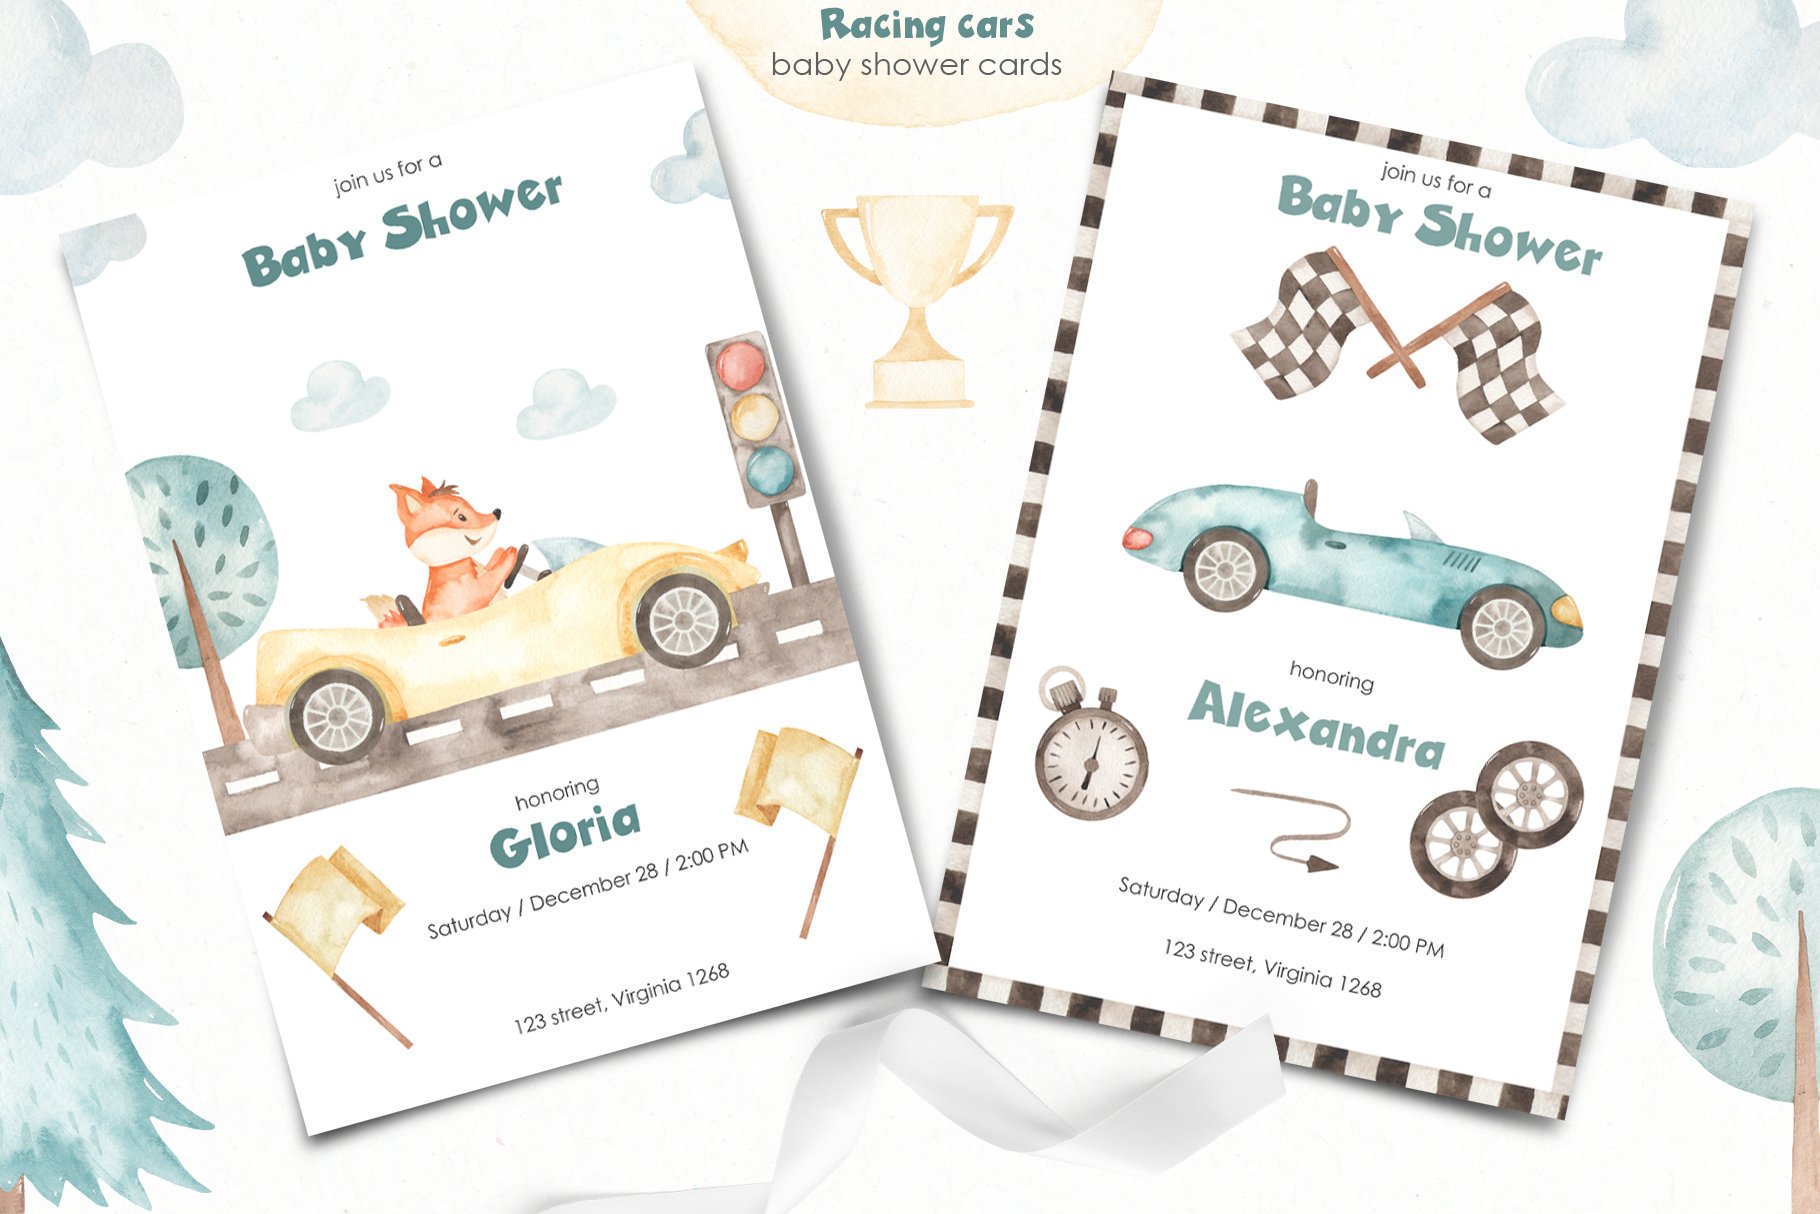 Vintage cards with racing cars.